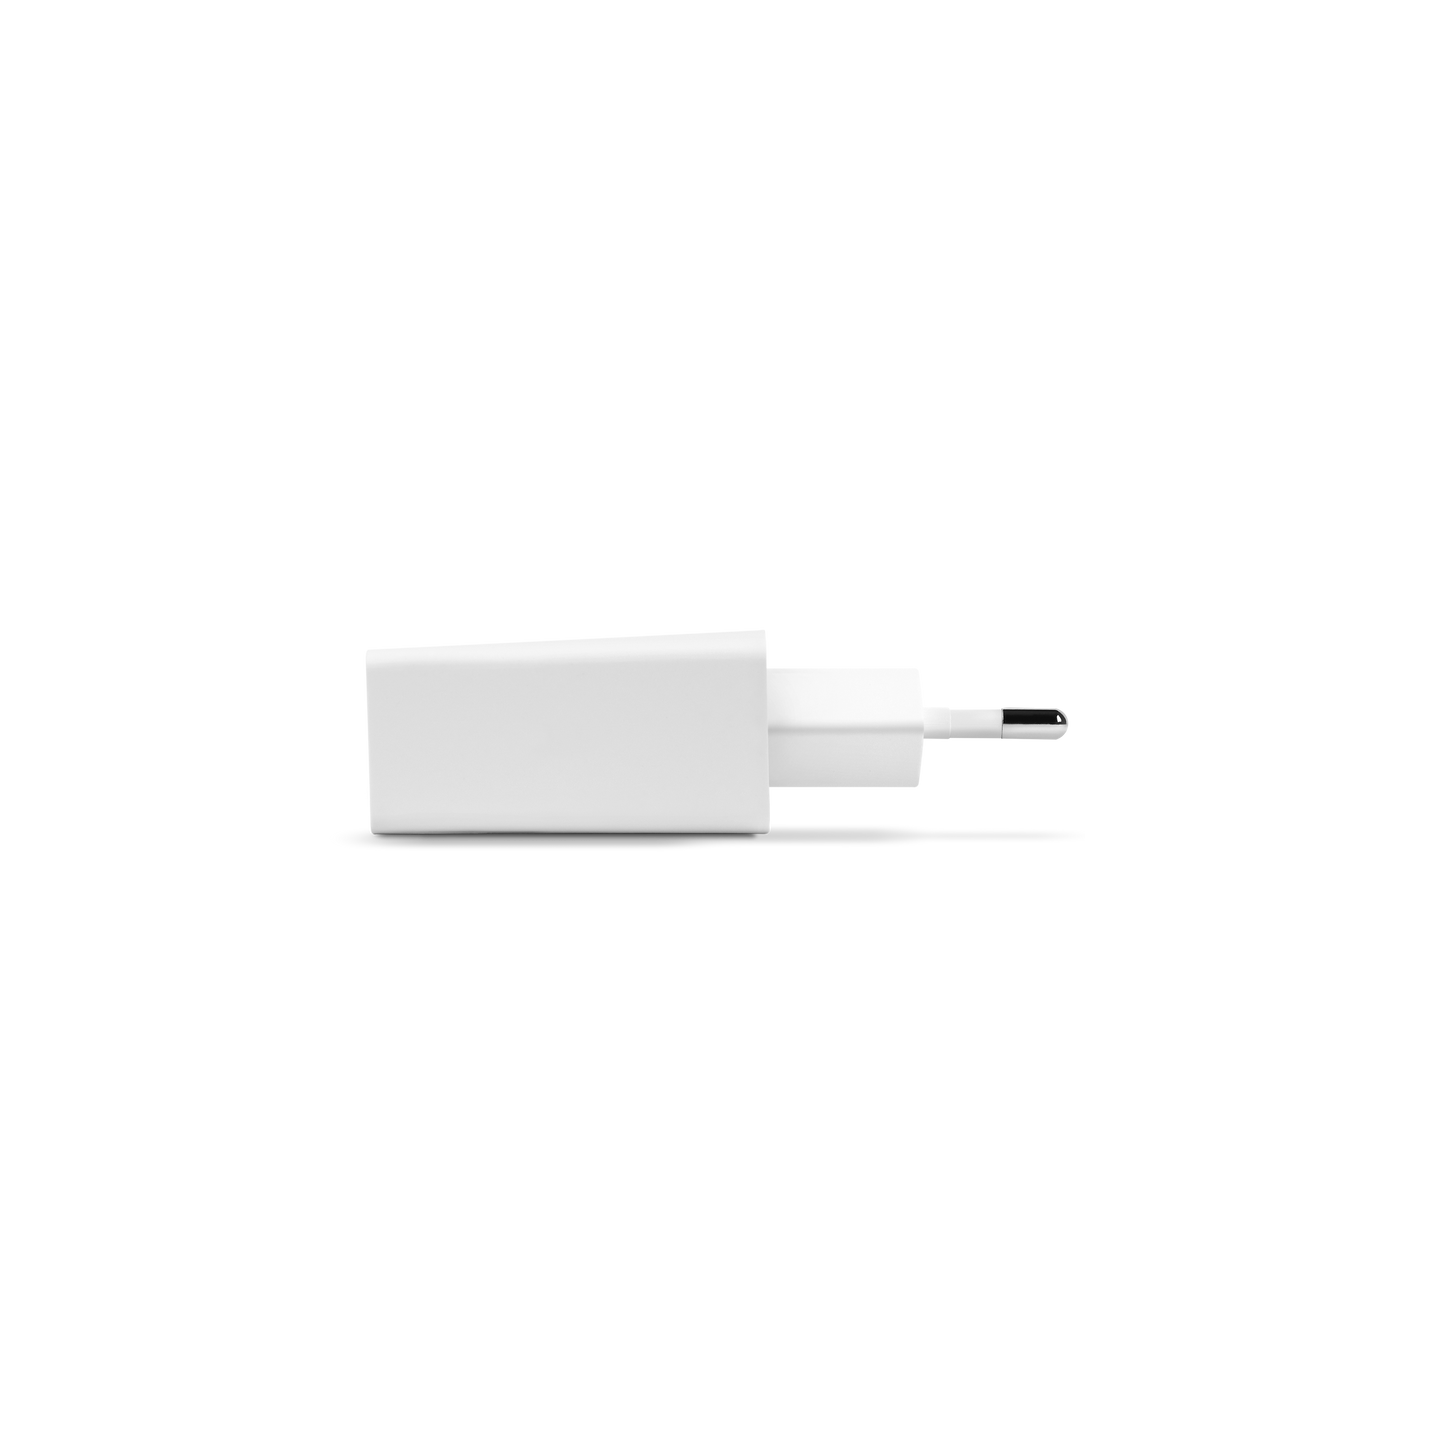 ttec - SmartCharger PD Travel Charger | 20W | White